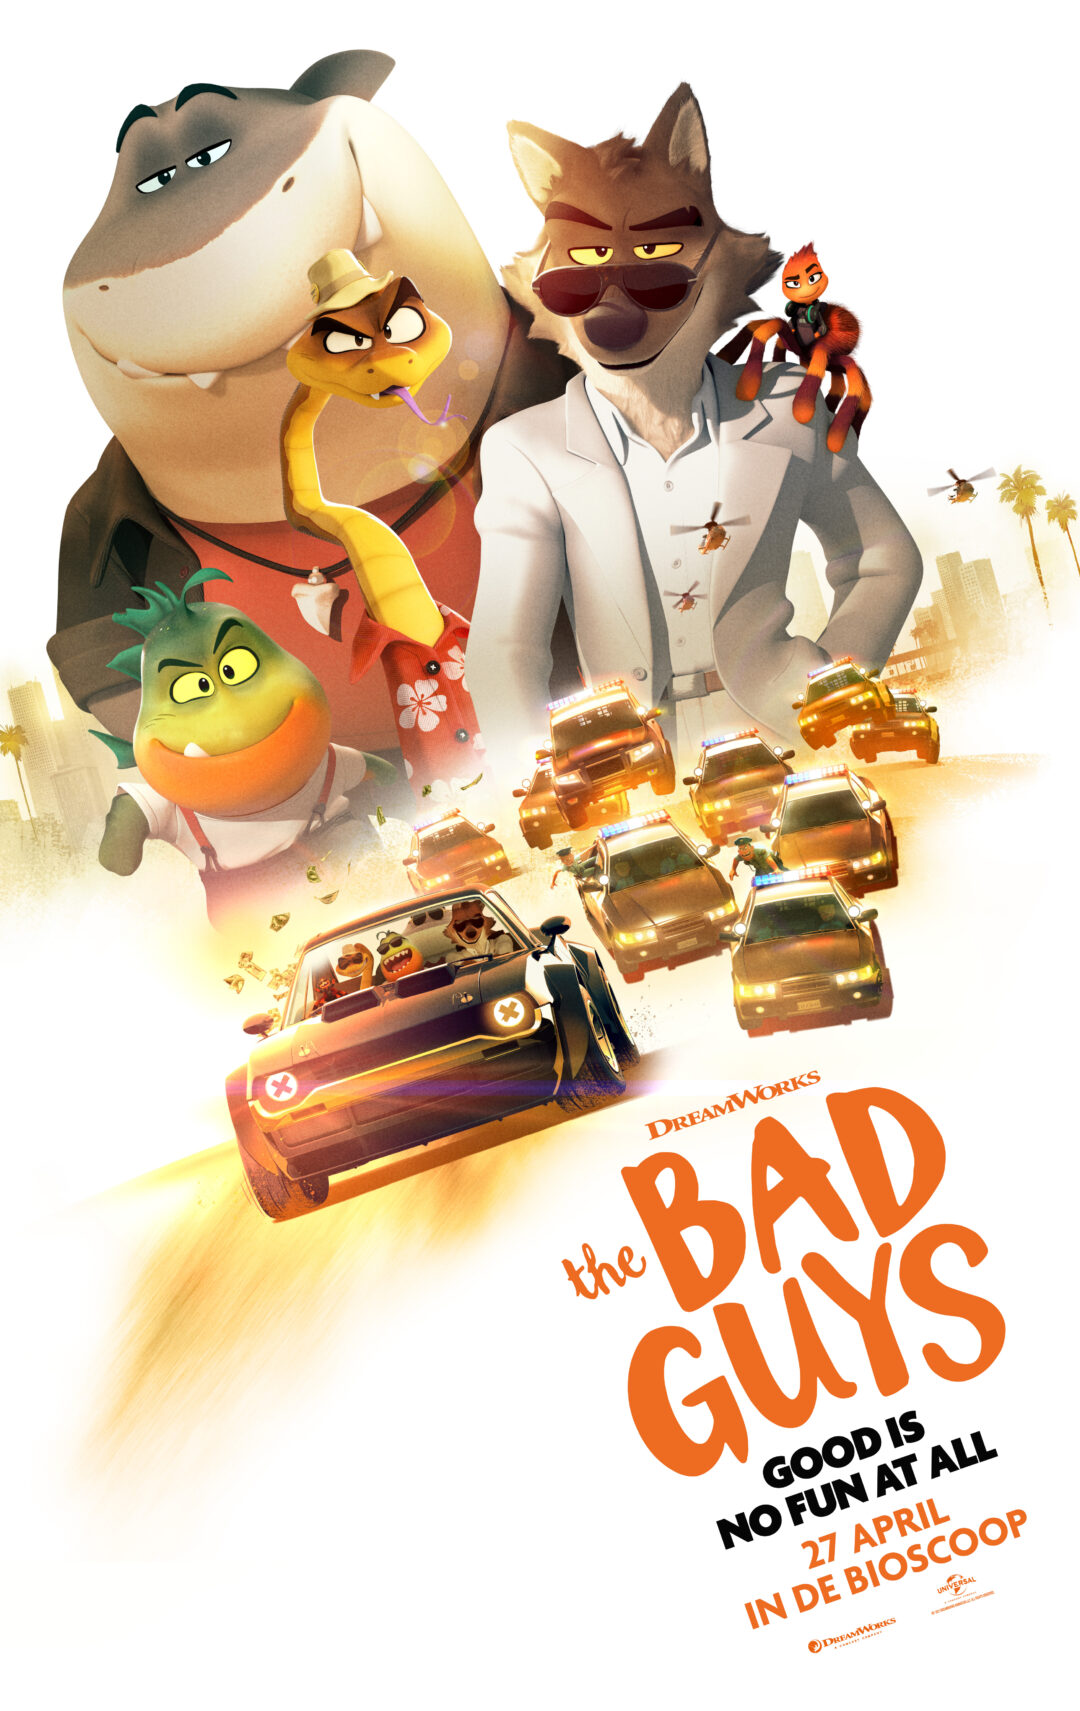 The-Bad-Guys_ps_1_jpg_sd-high_Copyright-2021-DreamWorks-Animation-LLC-All-Rights-Reserved.jpg